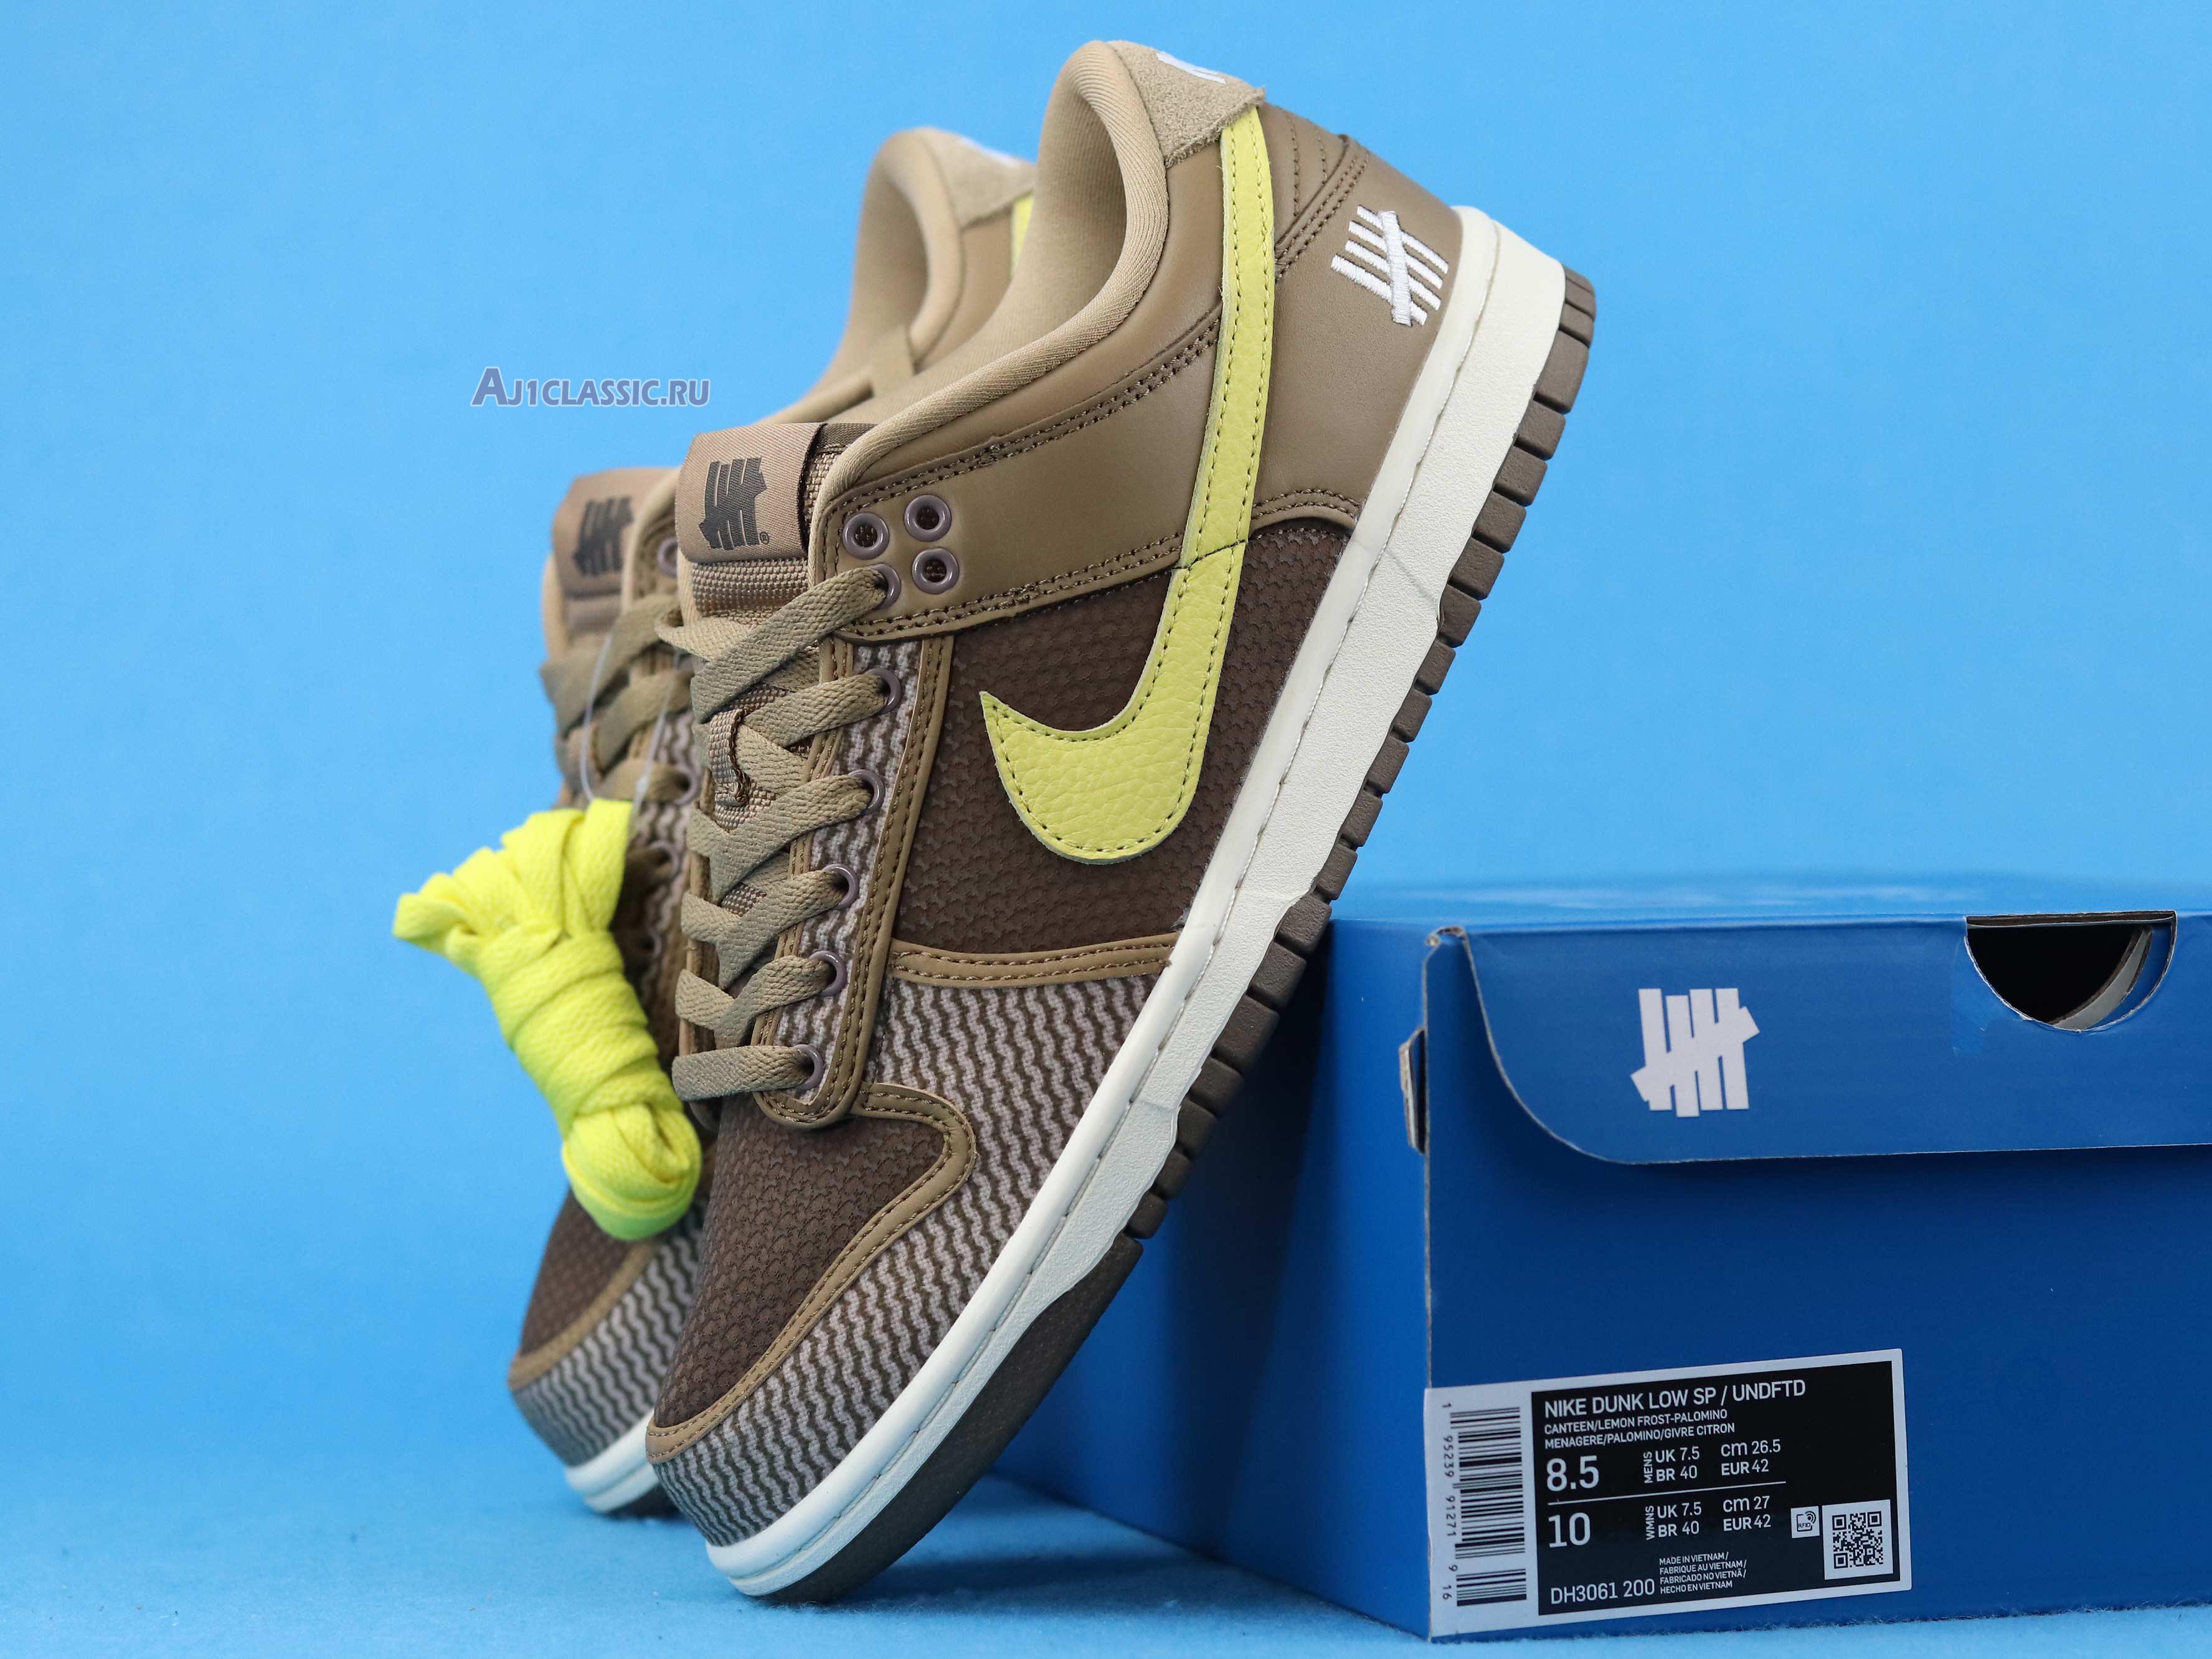 Undefeated x Nike Dunk Low SP "Canteen" DH3061-200